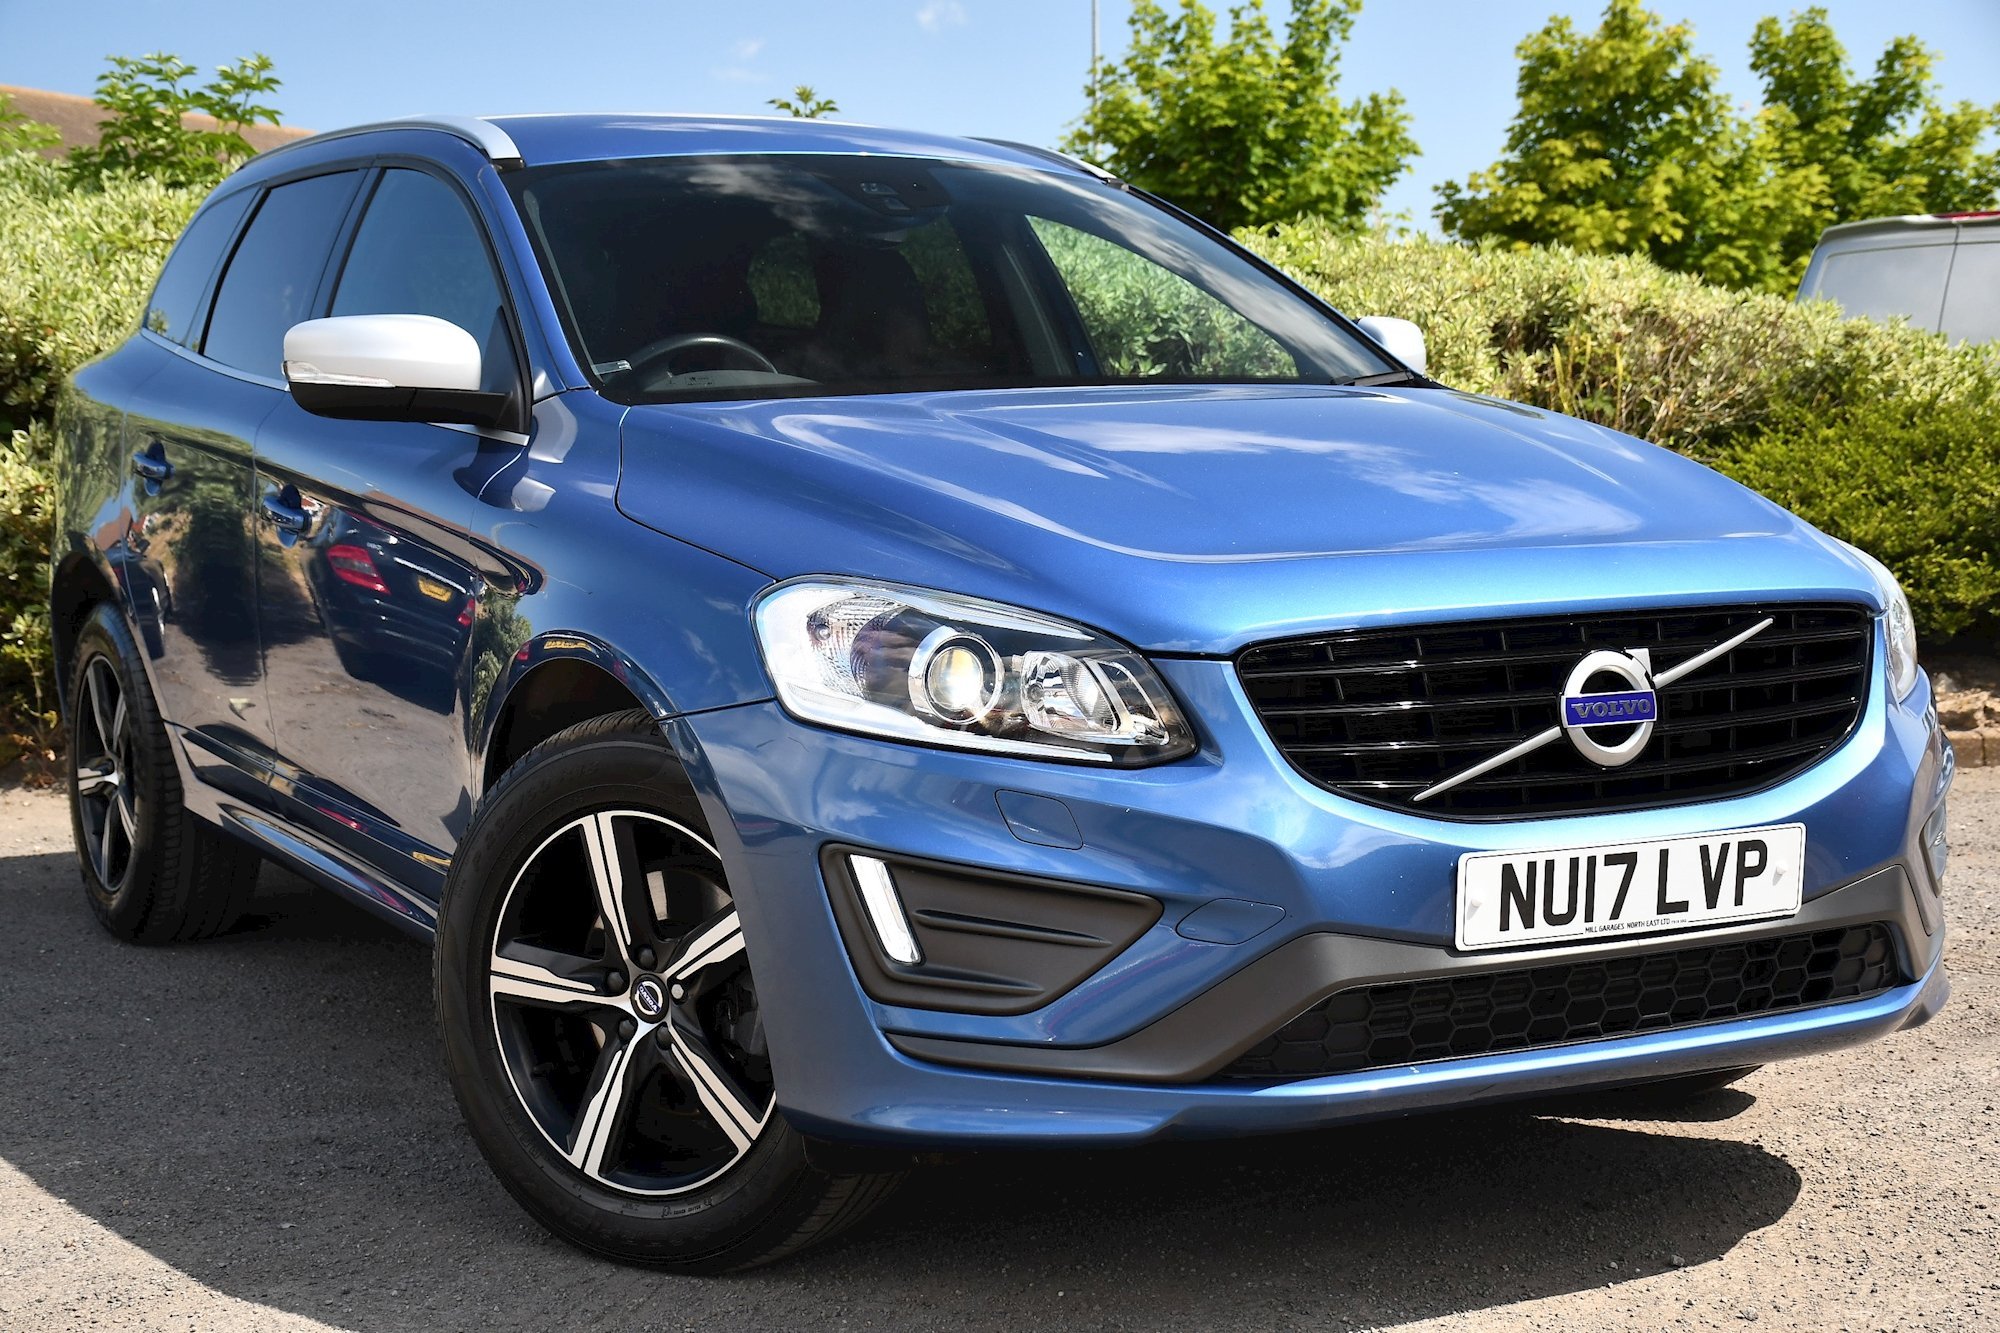 Used Volvo XC60 D4 R-DESIGN LUX NAV 2017 5dr Automatic (NU17LVP)